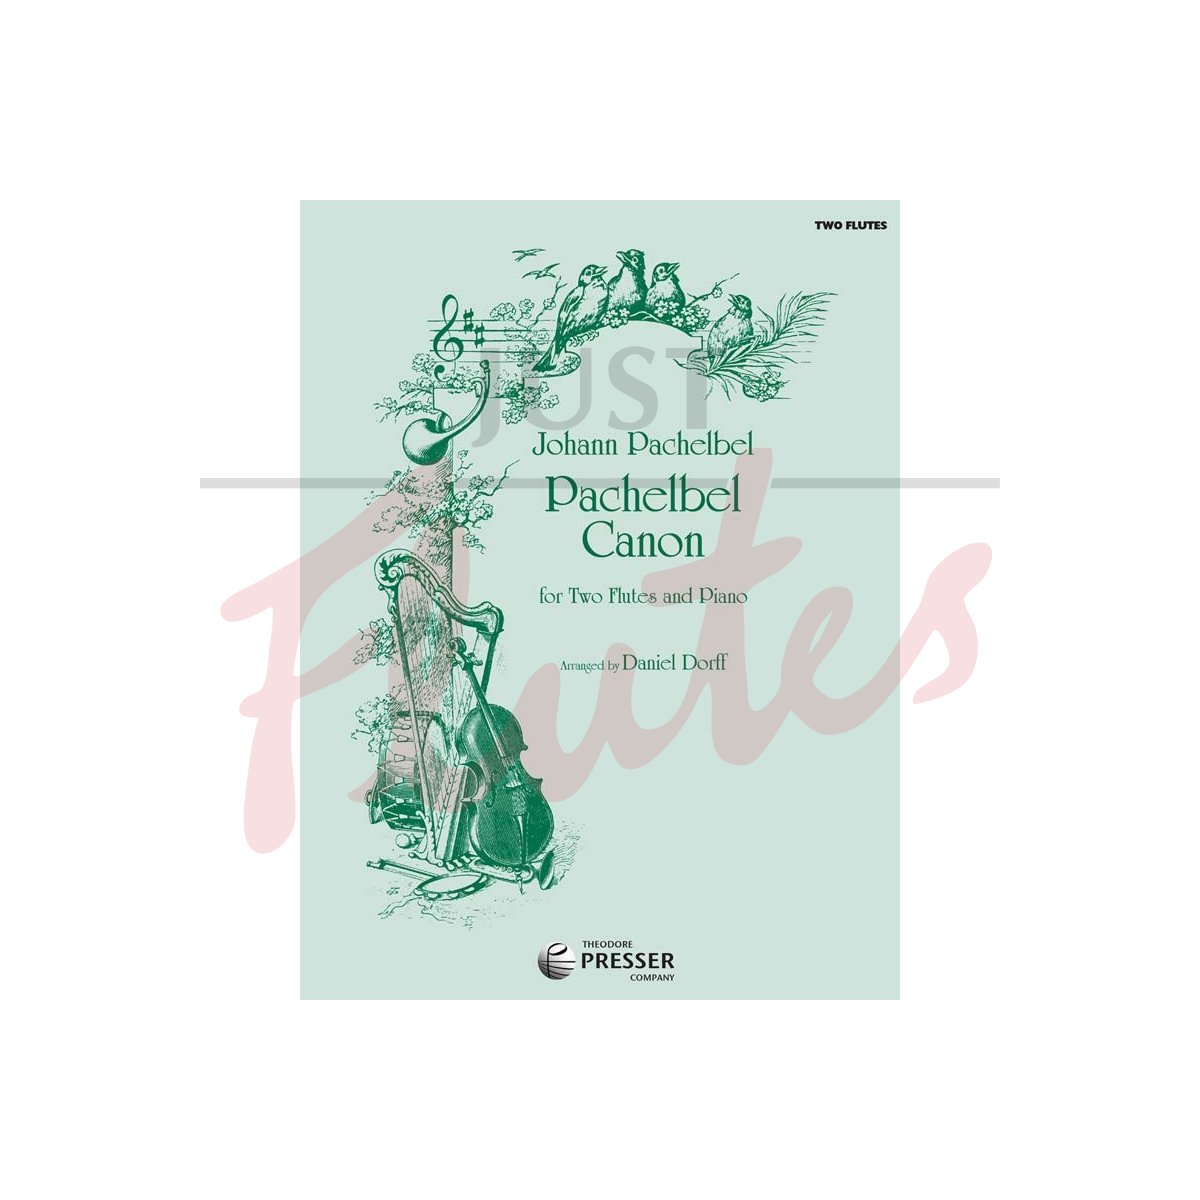 Pachelbel Canon for Two Flutes and Piano